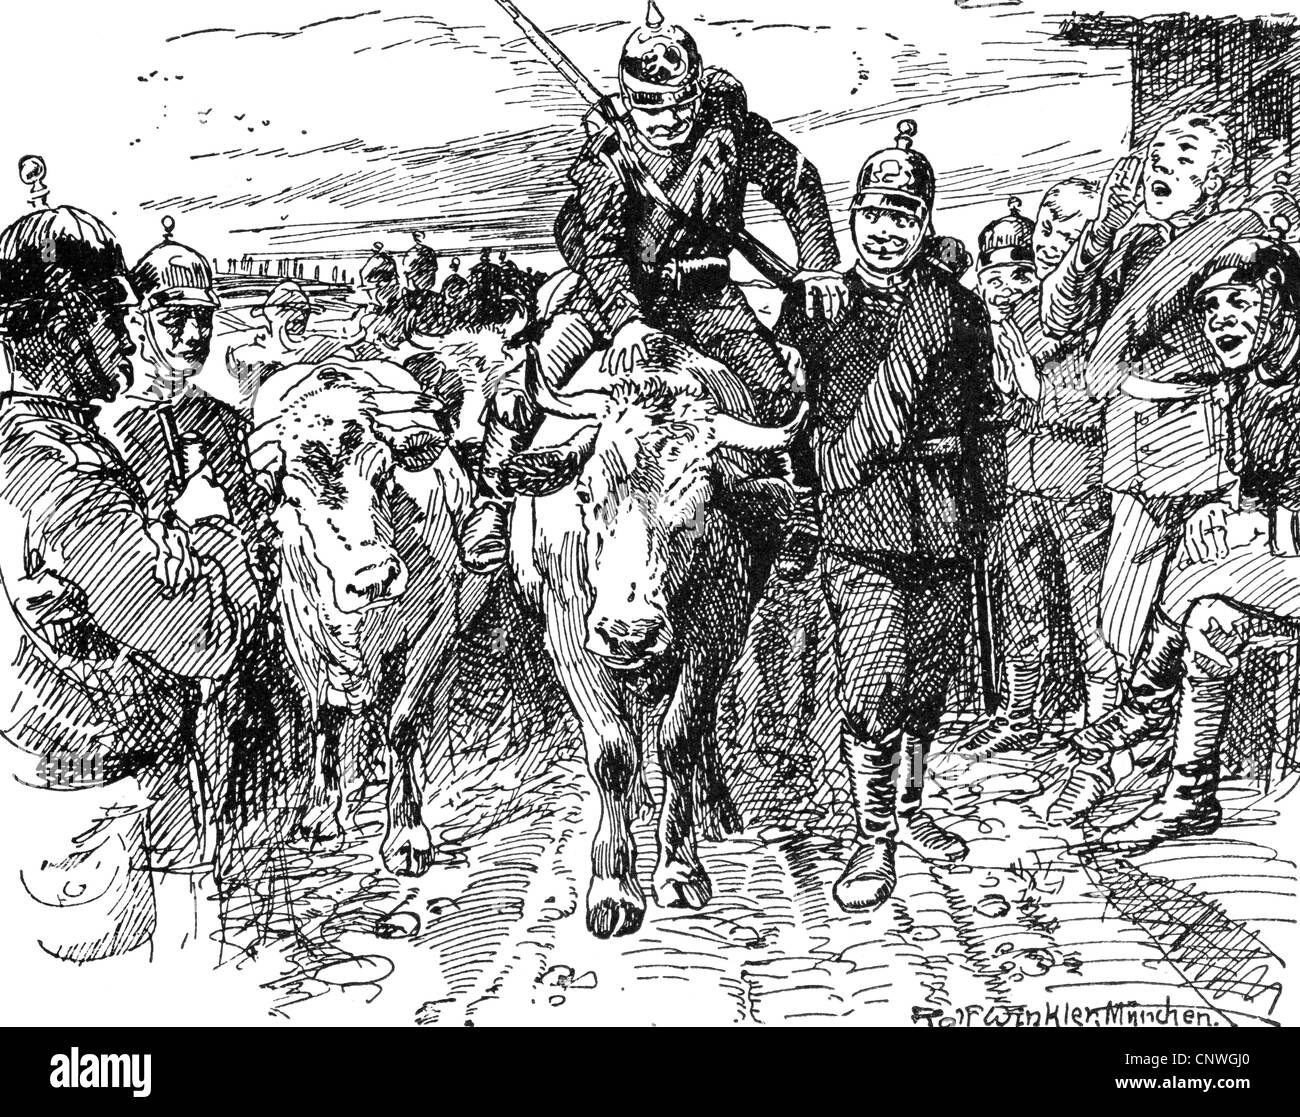 events, Franco-Prussian War 1870 - 1871, supplies, Prussian soldiers with confiscated oxen, drawing by Rudolf Winckler, late 19th century, Additional-Rights-Clearences-Not Available Stock Photo